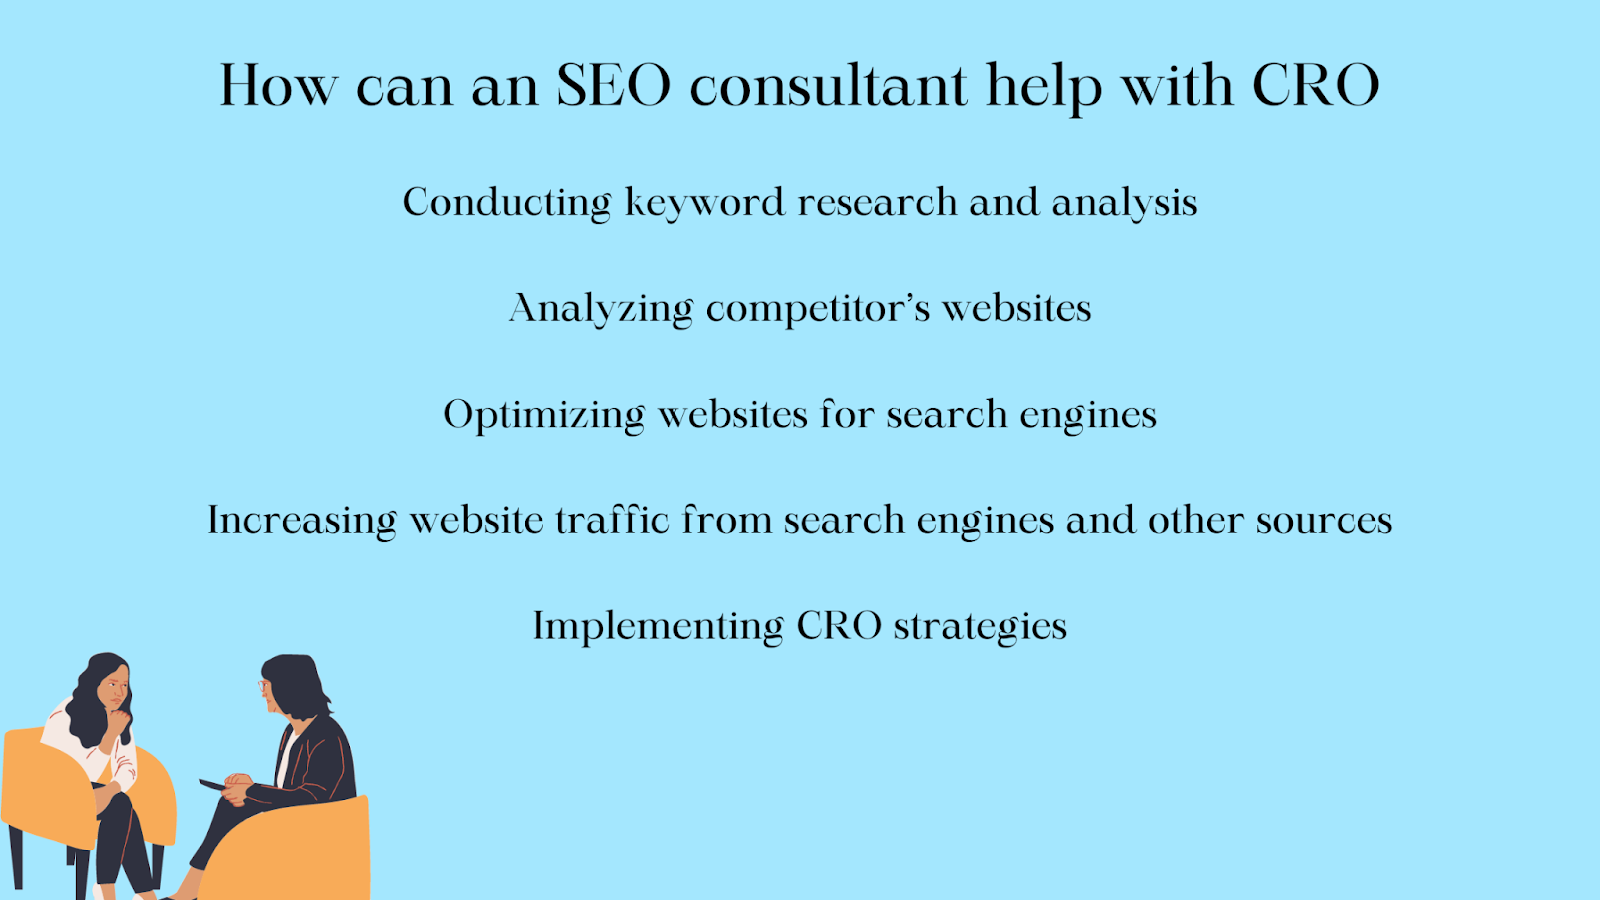 How can an SEO consultant help with CRO